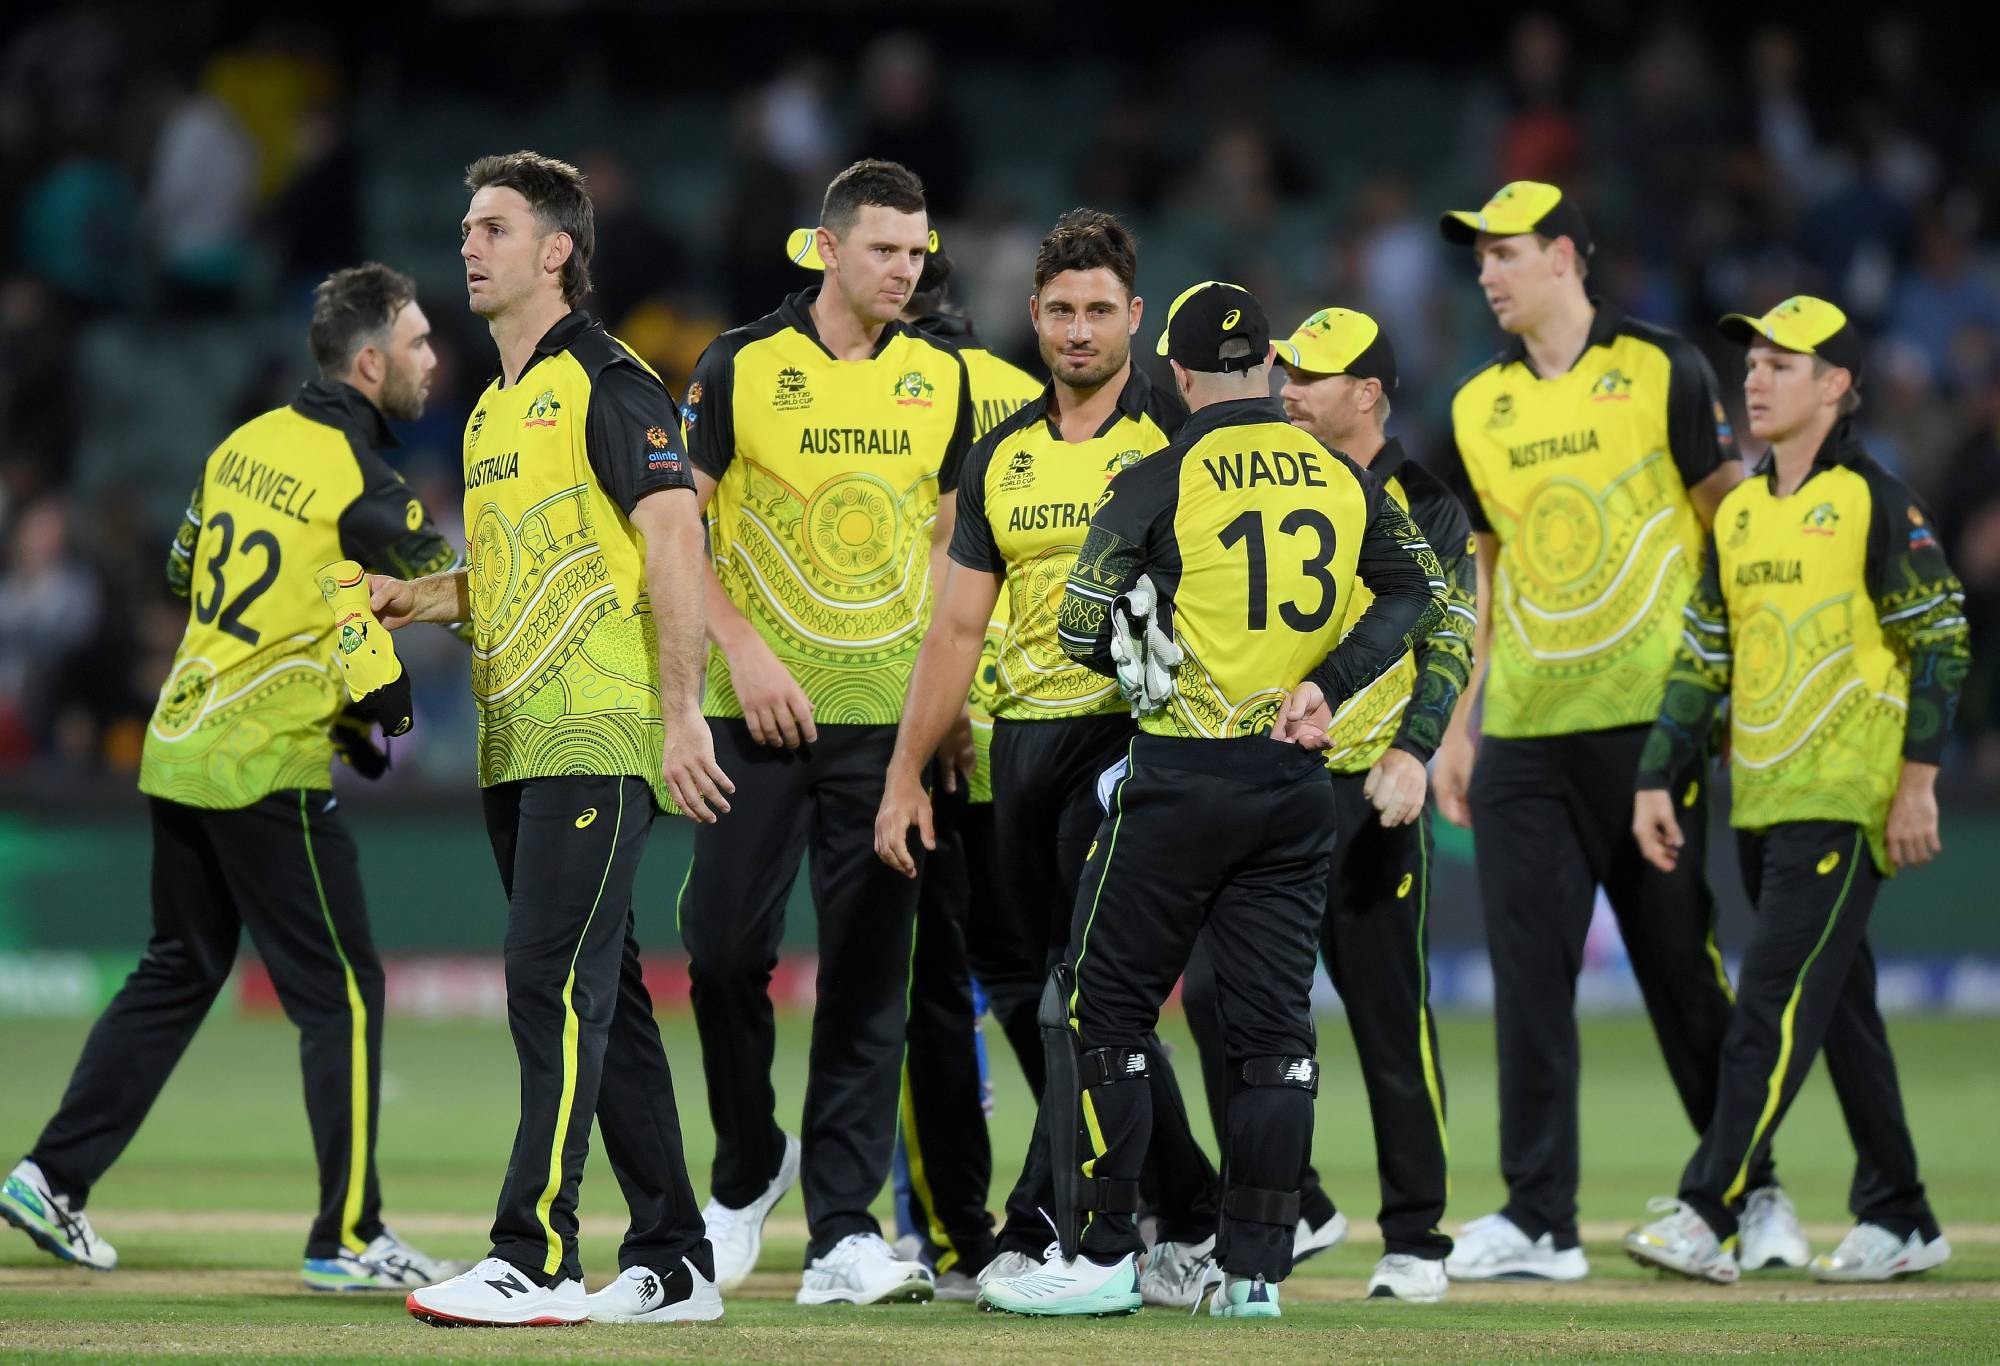 ADELAIDE, AUSTRALIA - NOVEMBER 04: Australian players celebrate victory following the ICC Men's T20 World Cup match between Australia and Afghanistan at Adelaide Oval on November 04, 2022 in Adelaide, Australia. (Photo by Mark Brake-ICC/ICC via Getty Images)